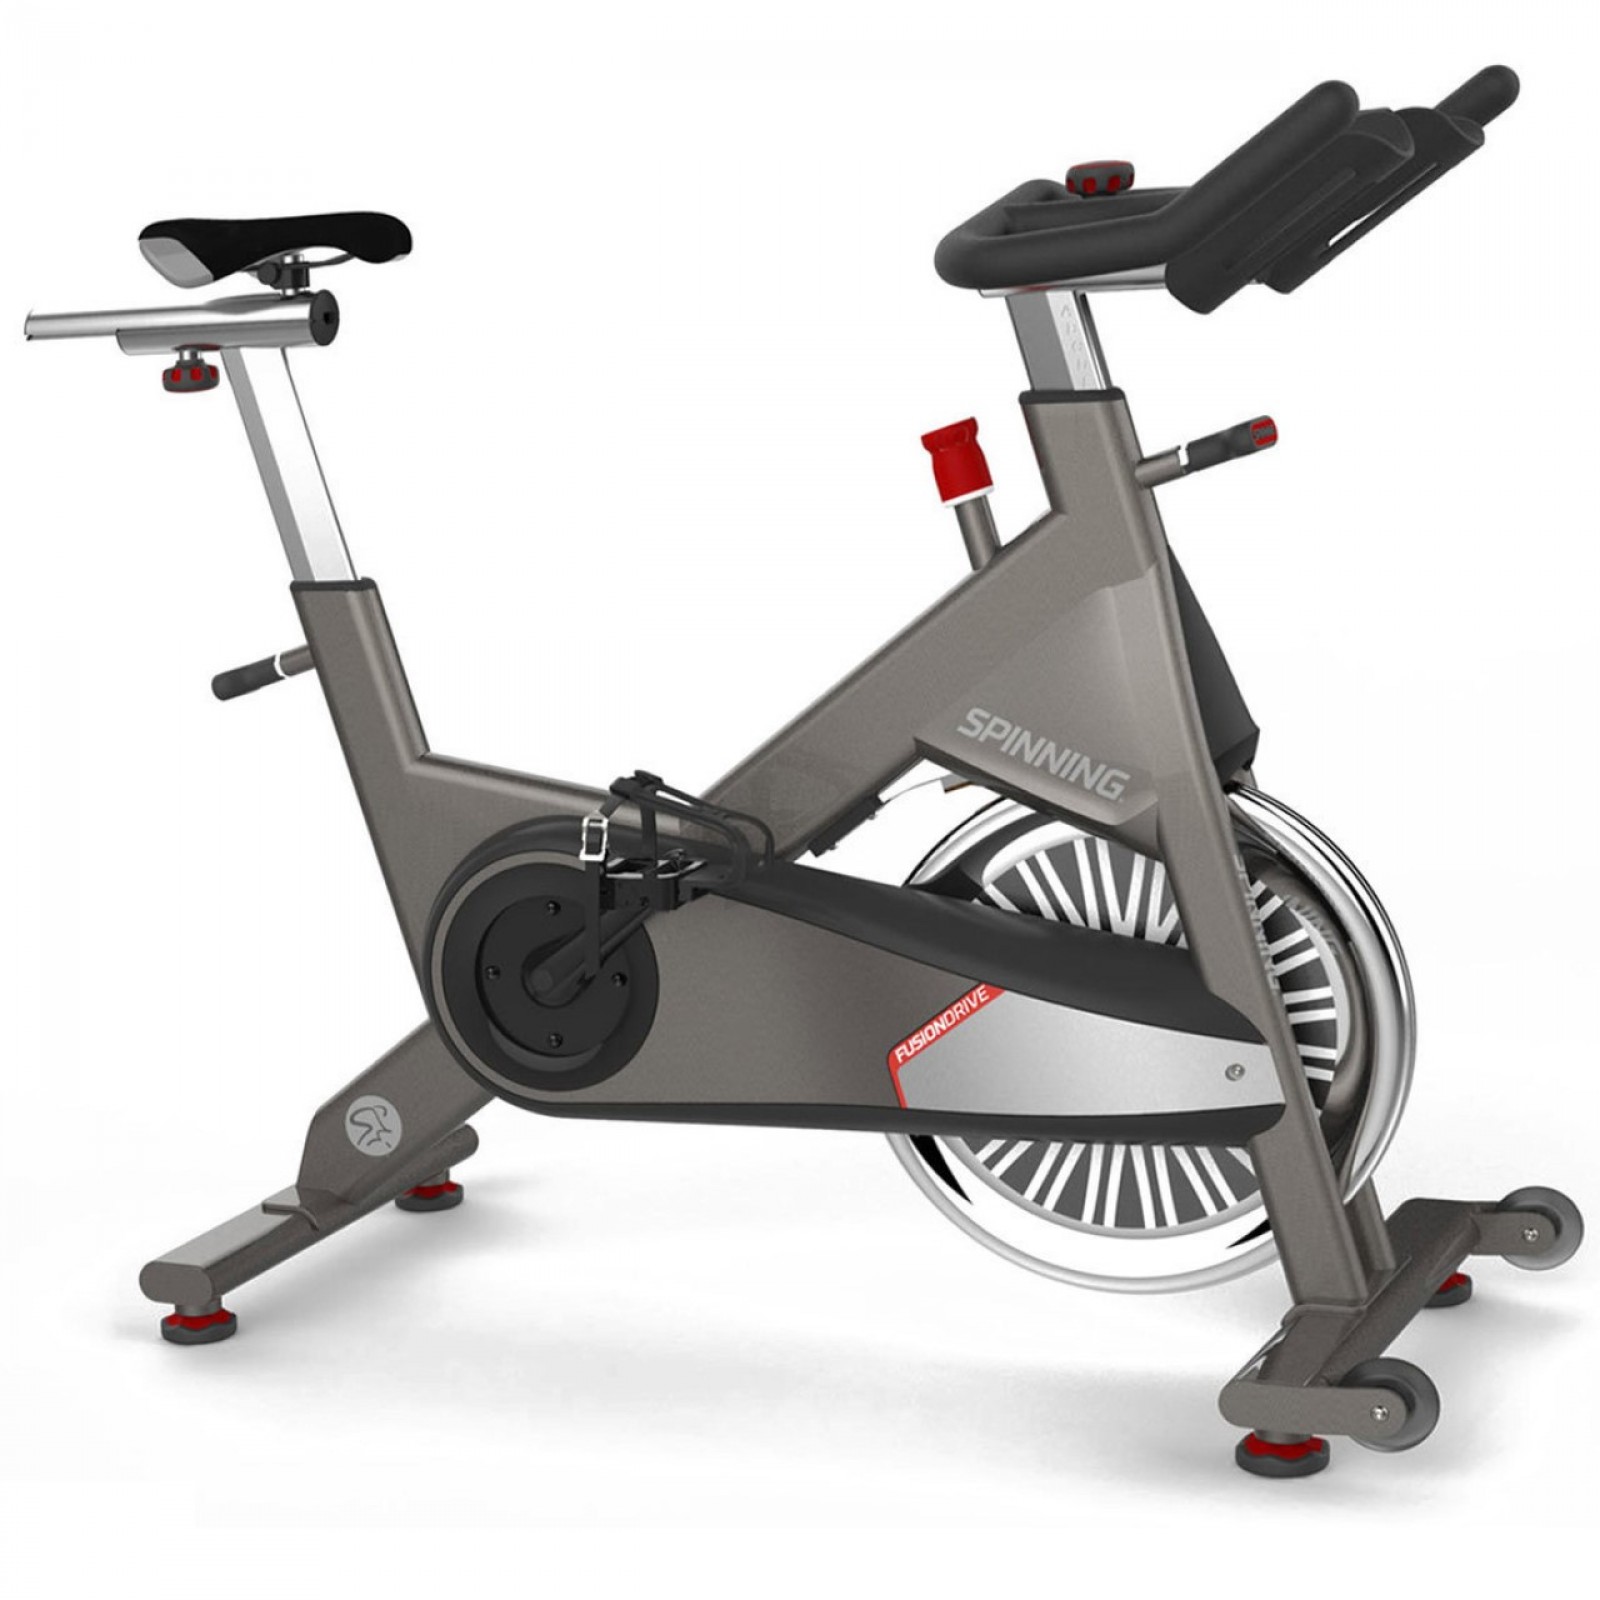 Spinning Bike Spinner P5 - Europe's No. 1 for home fitness